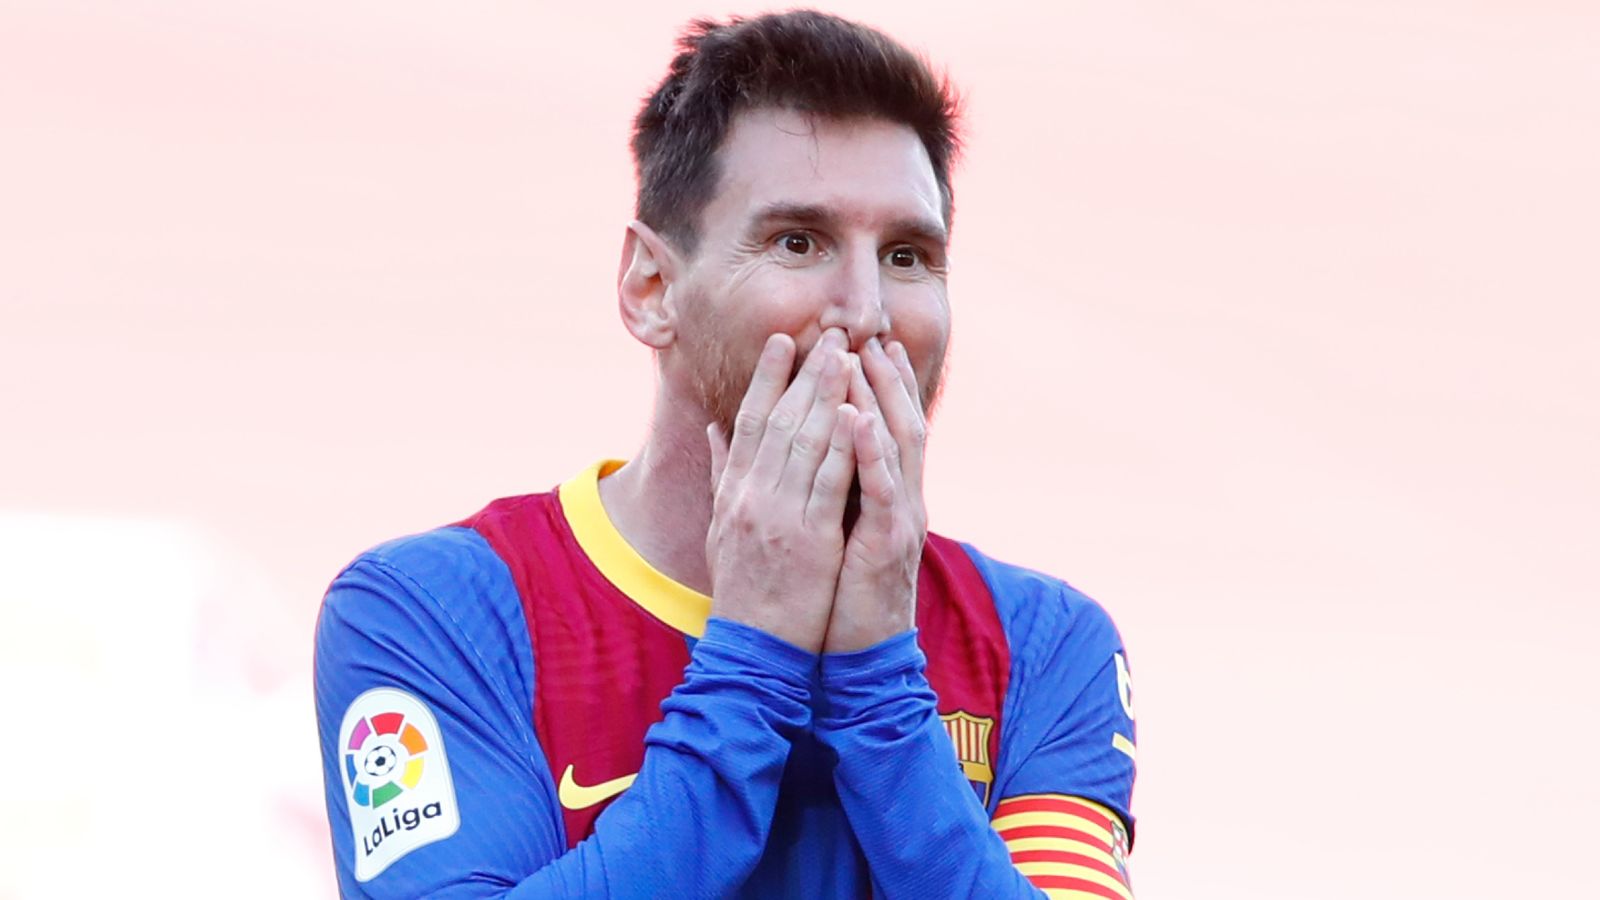 Lionel Messi is a free agent, but Barcelona president Joan Laporta says contract talks 'on right track'